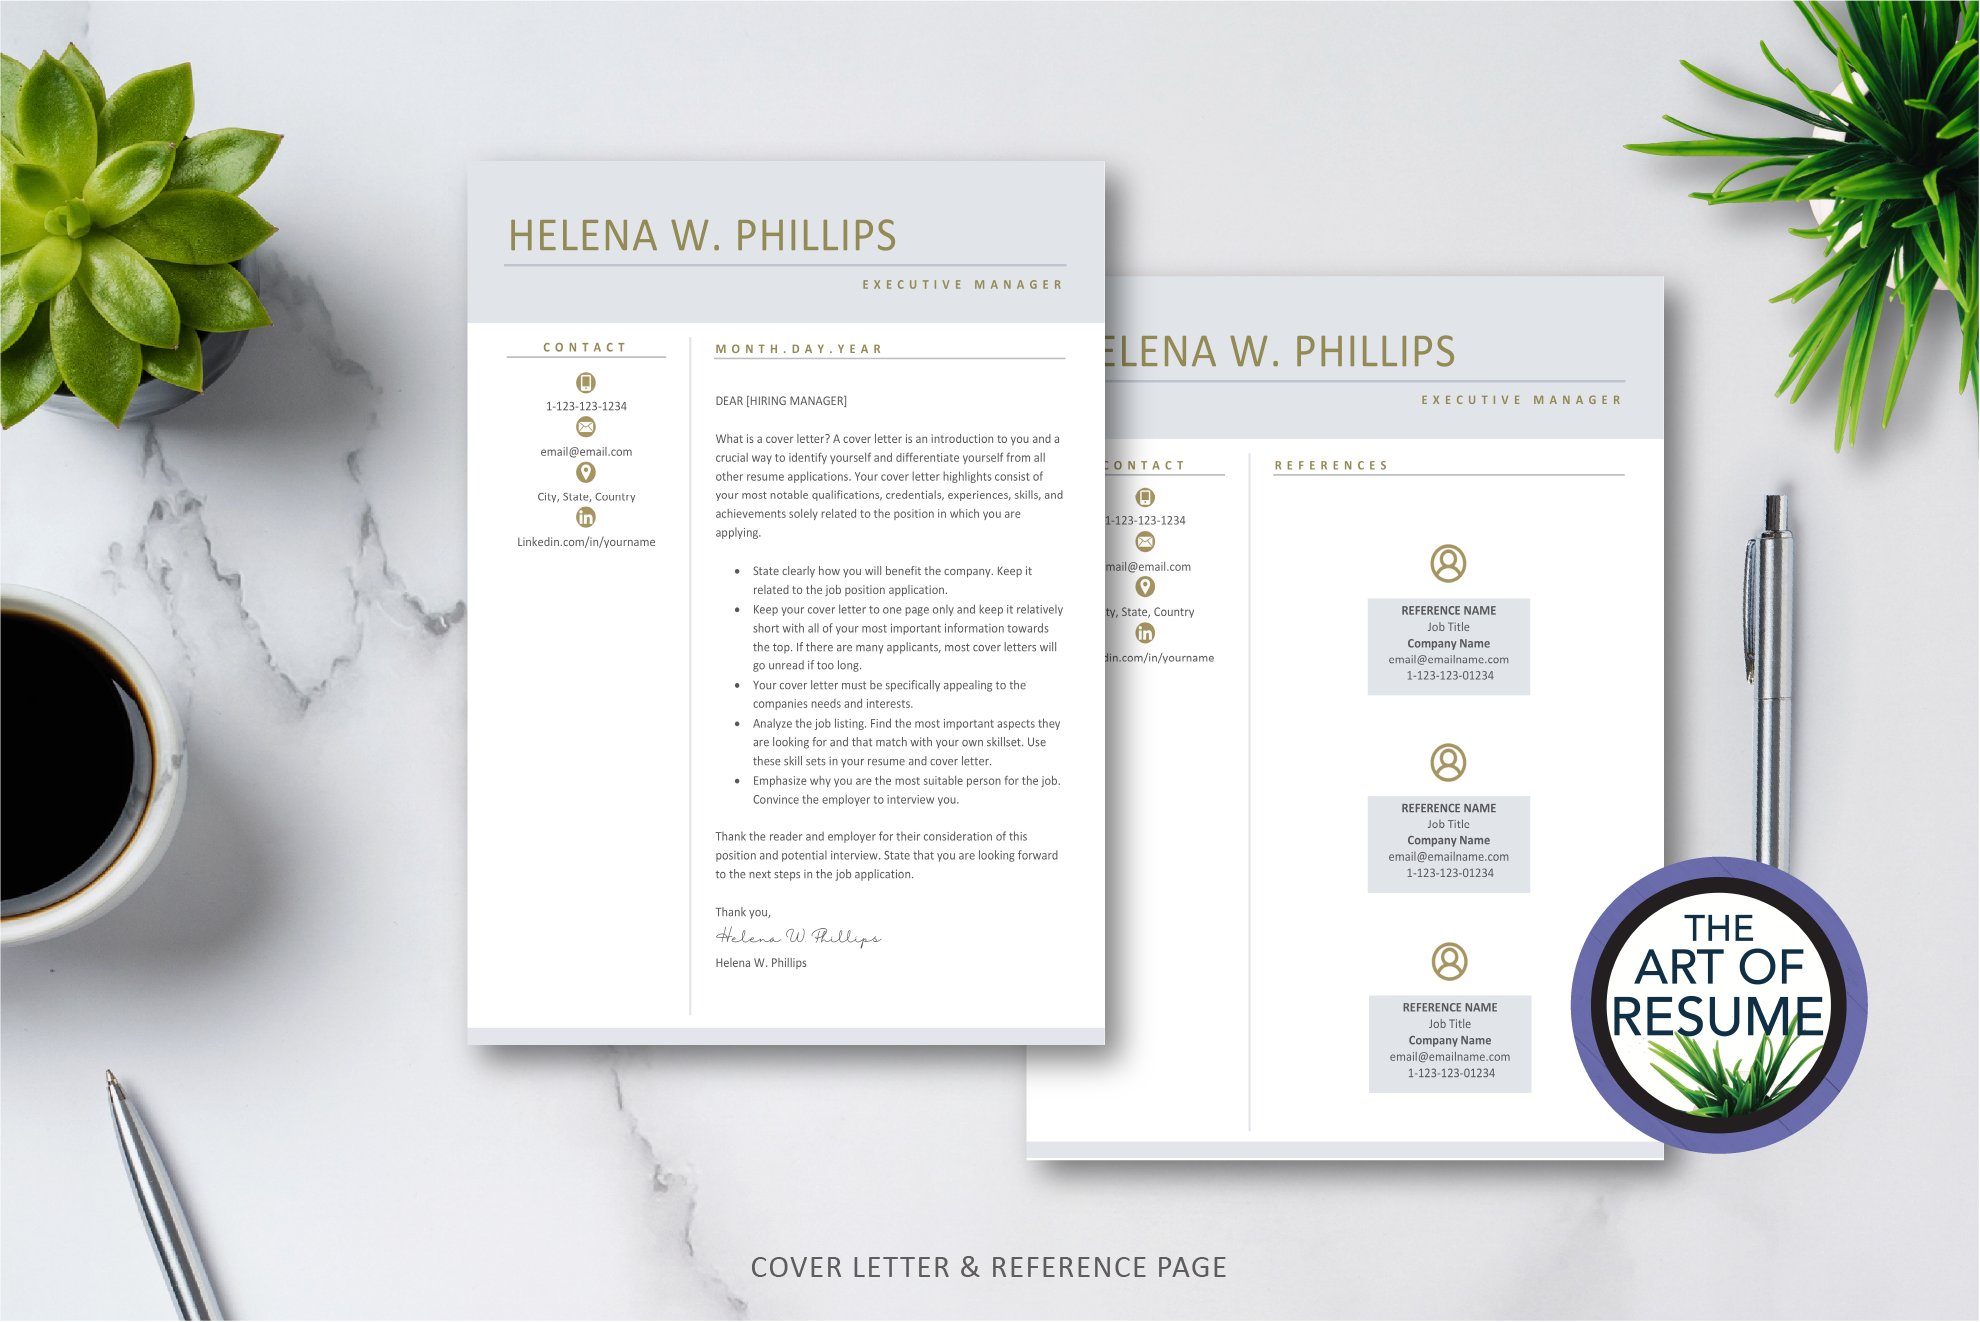 Resume CV Template Word & Mac Pages preview image.